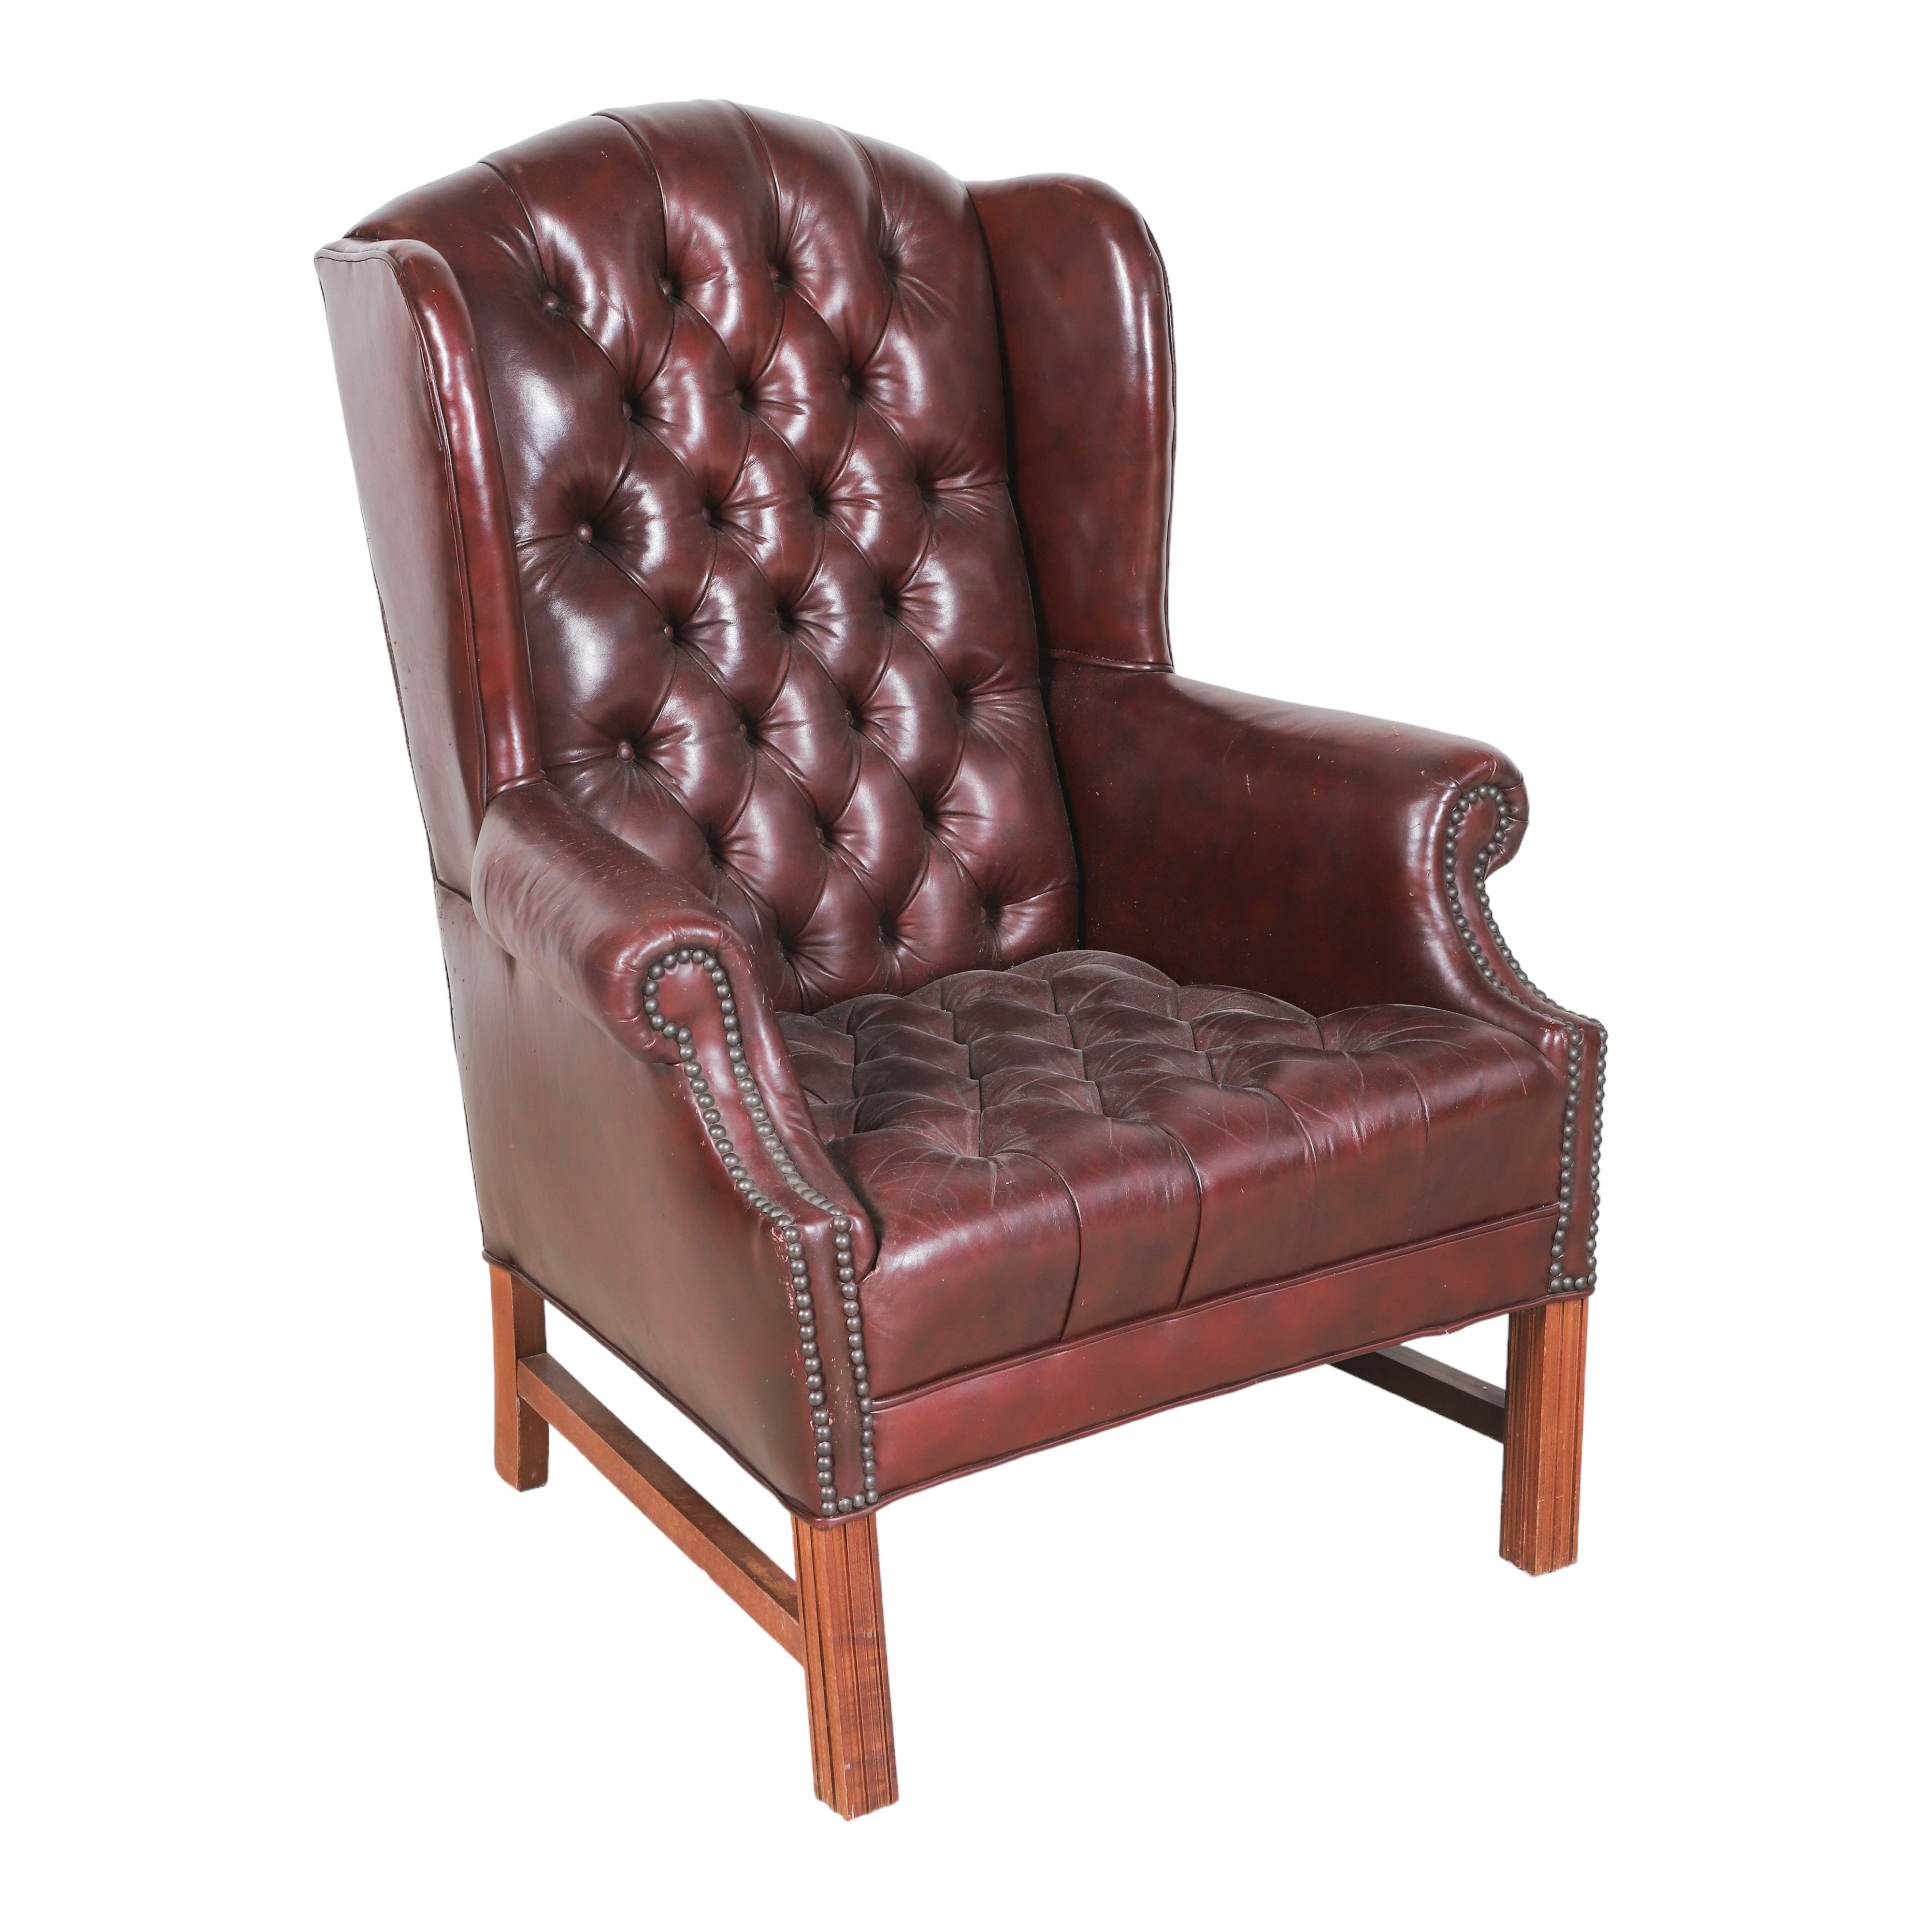 Chippendale style tufted leather